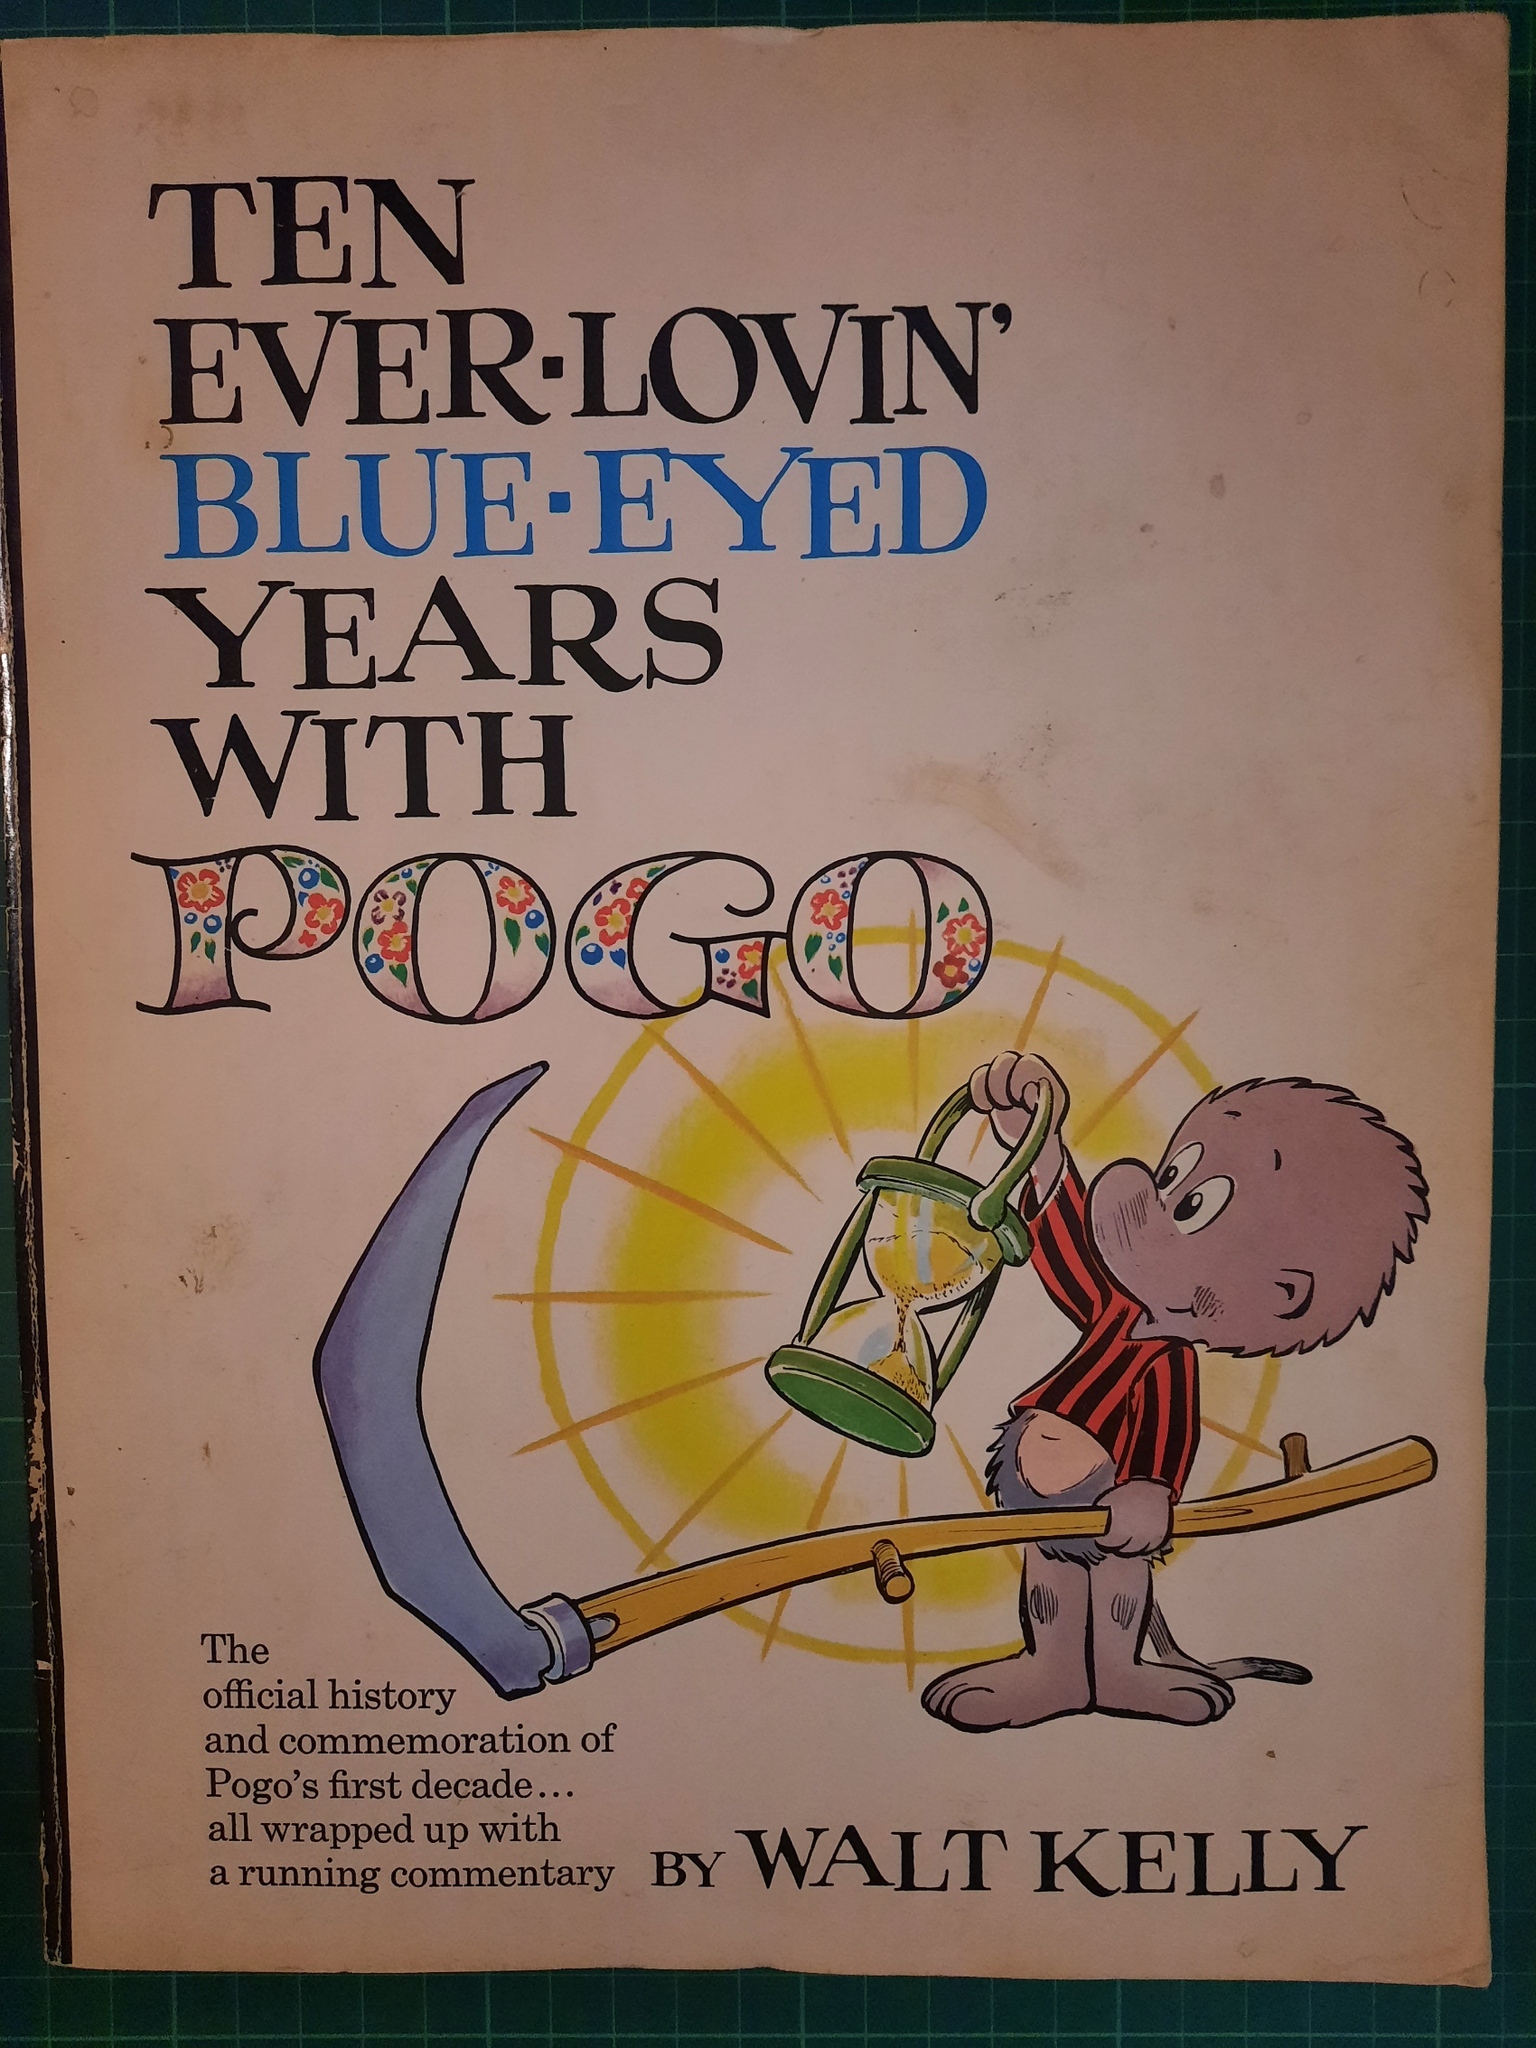 Ten ever-lovin' blue-eyed years with Pogo